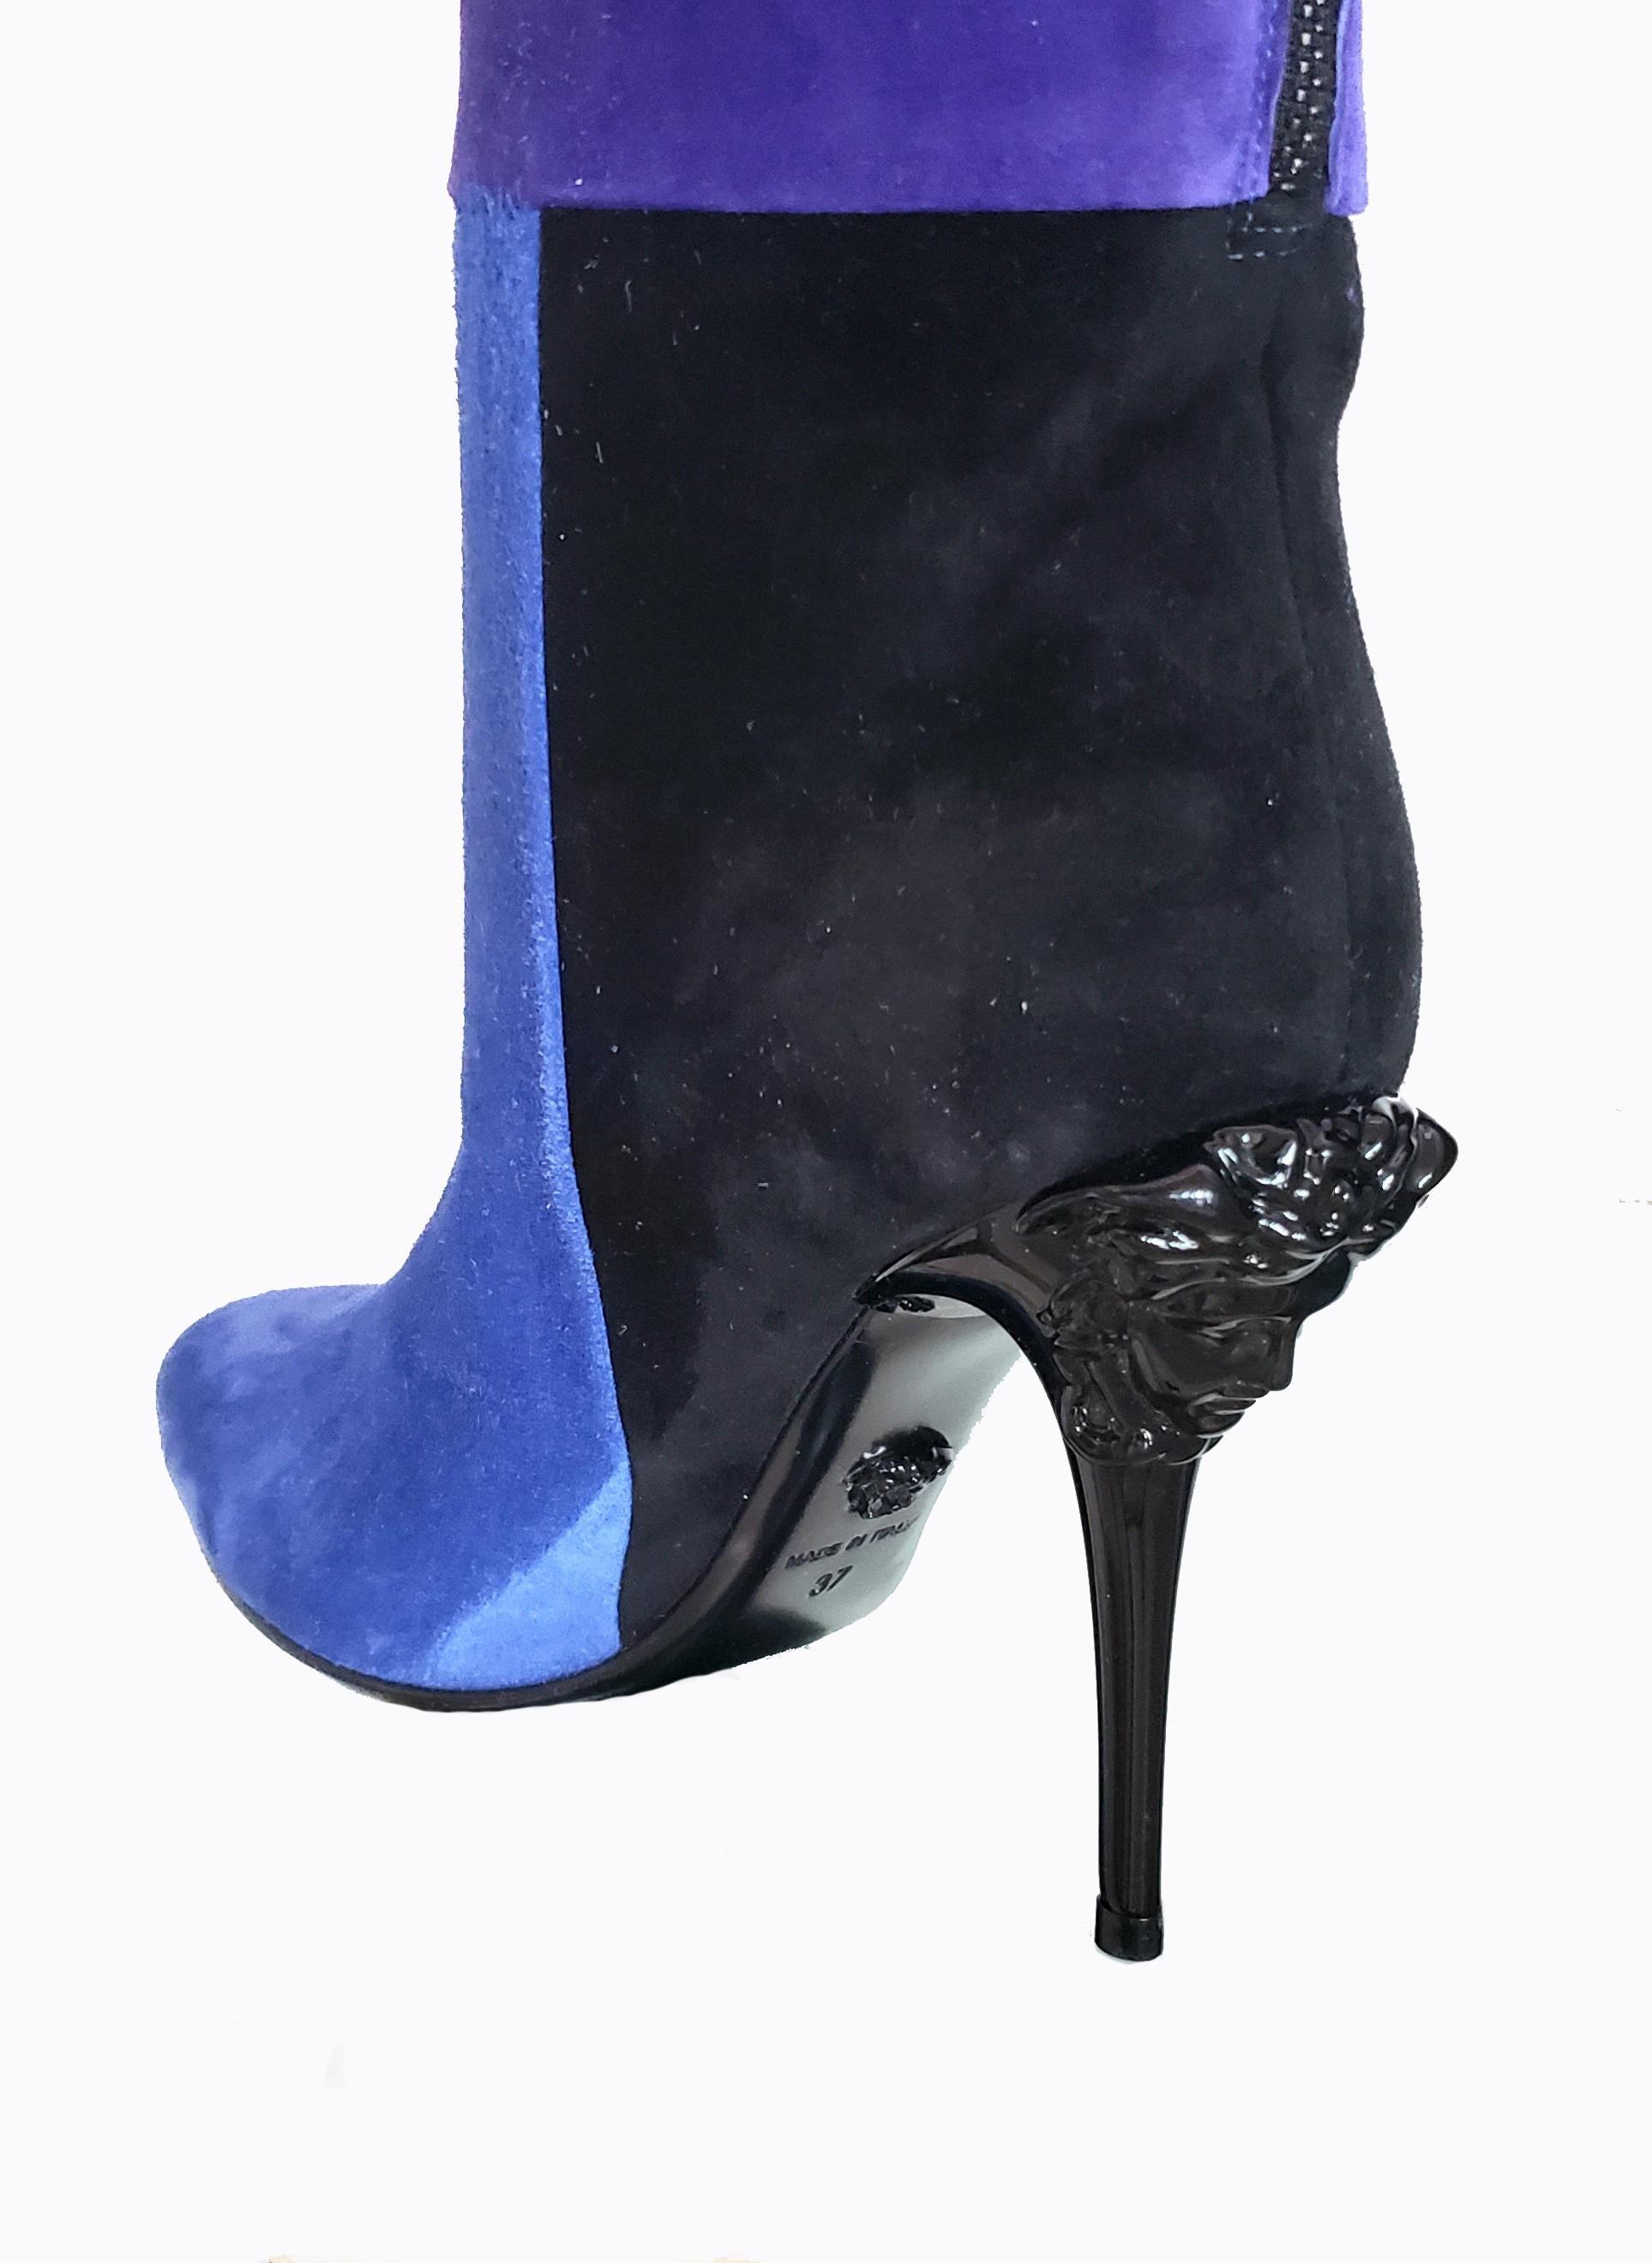 New VERSACE COLOR BLOCK BLUE SUEDE PALAZZO BOOTS 37 - 7 For Sale 3